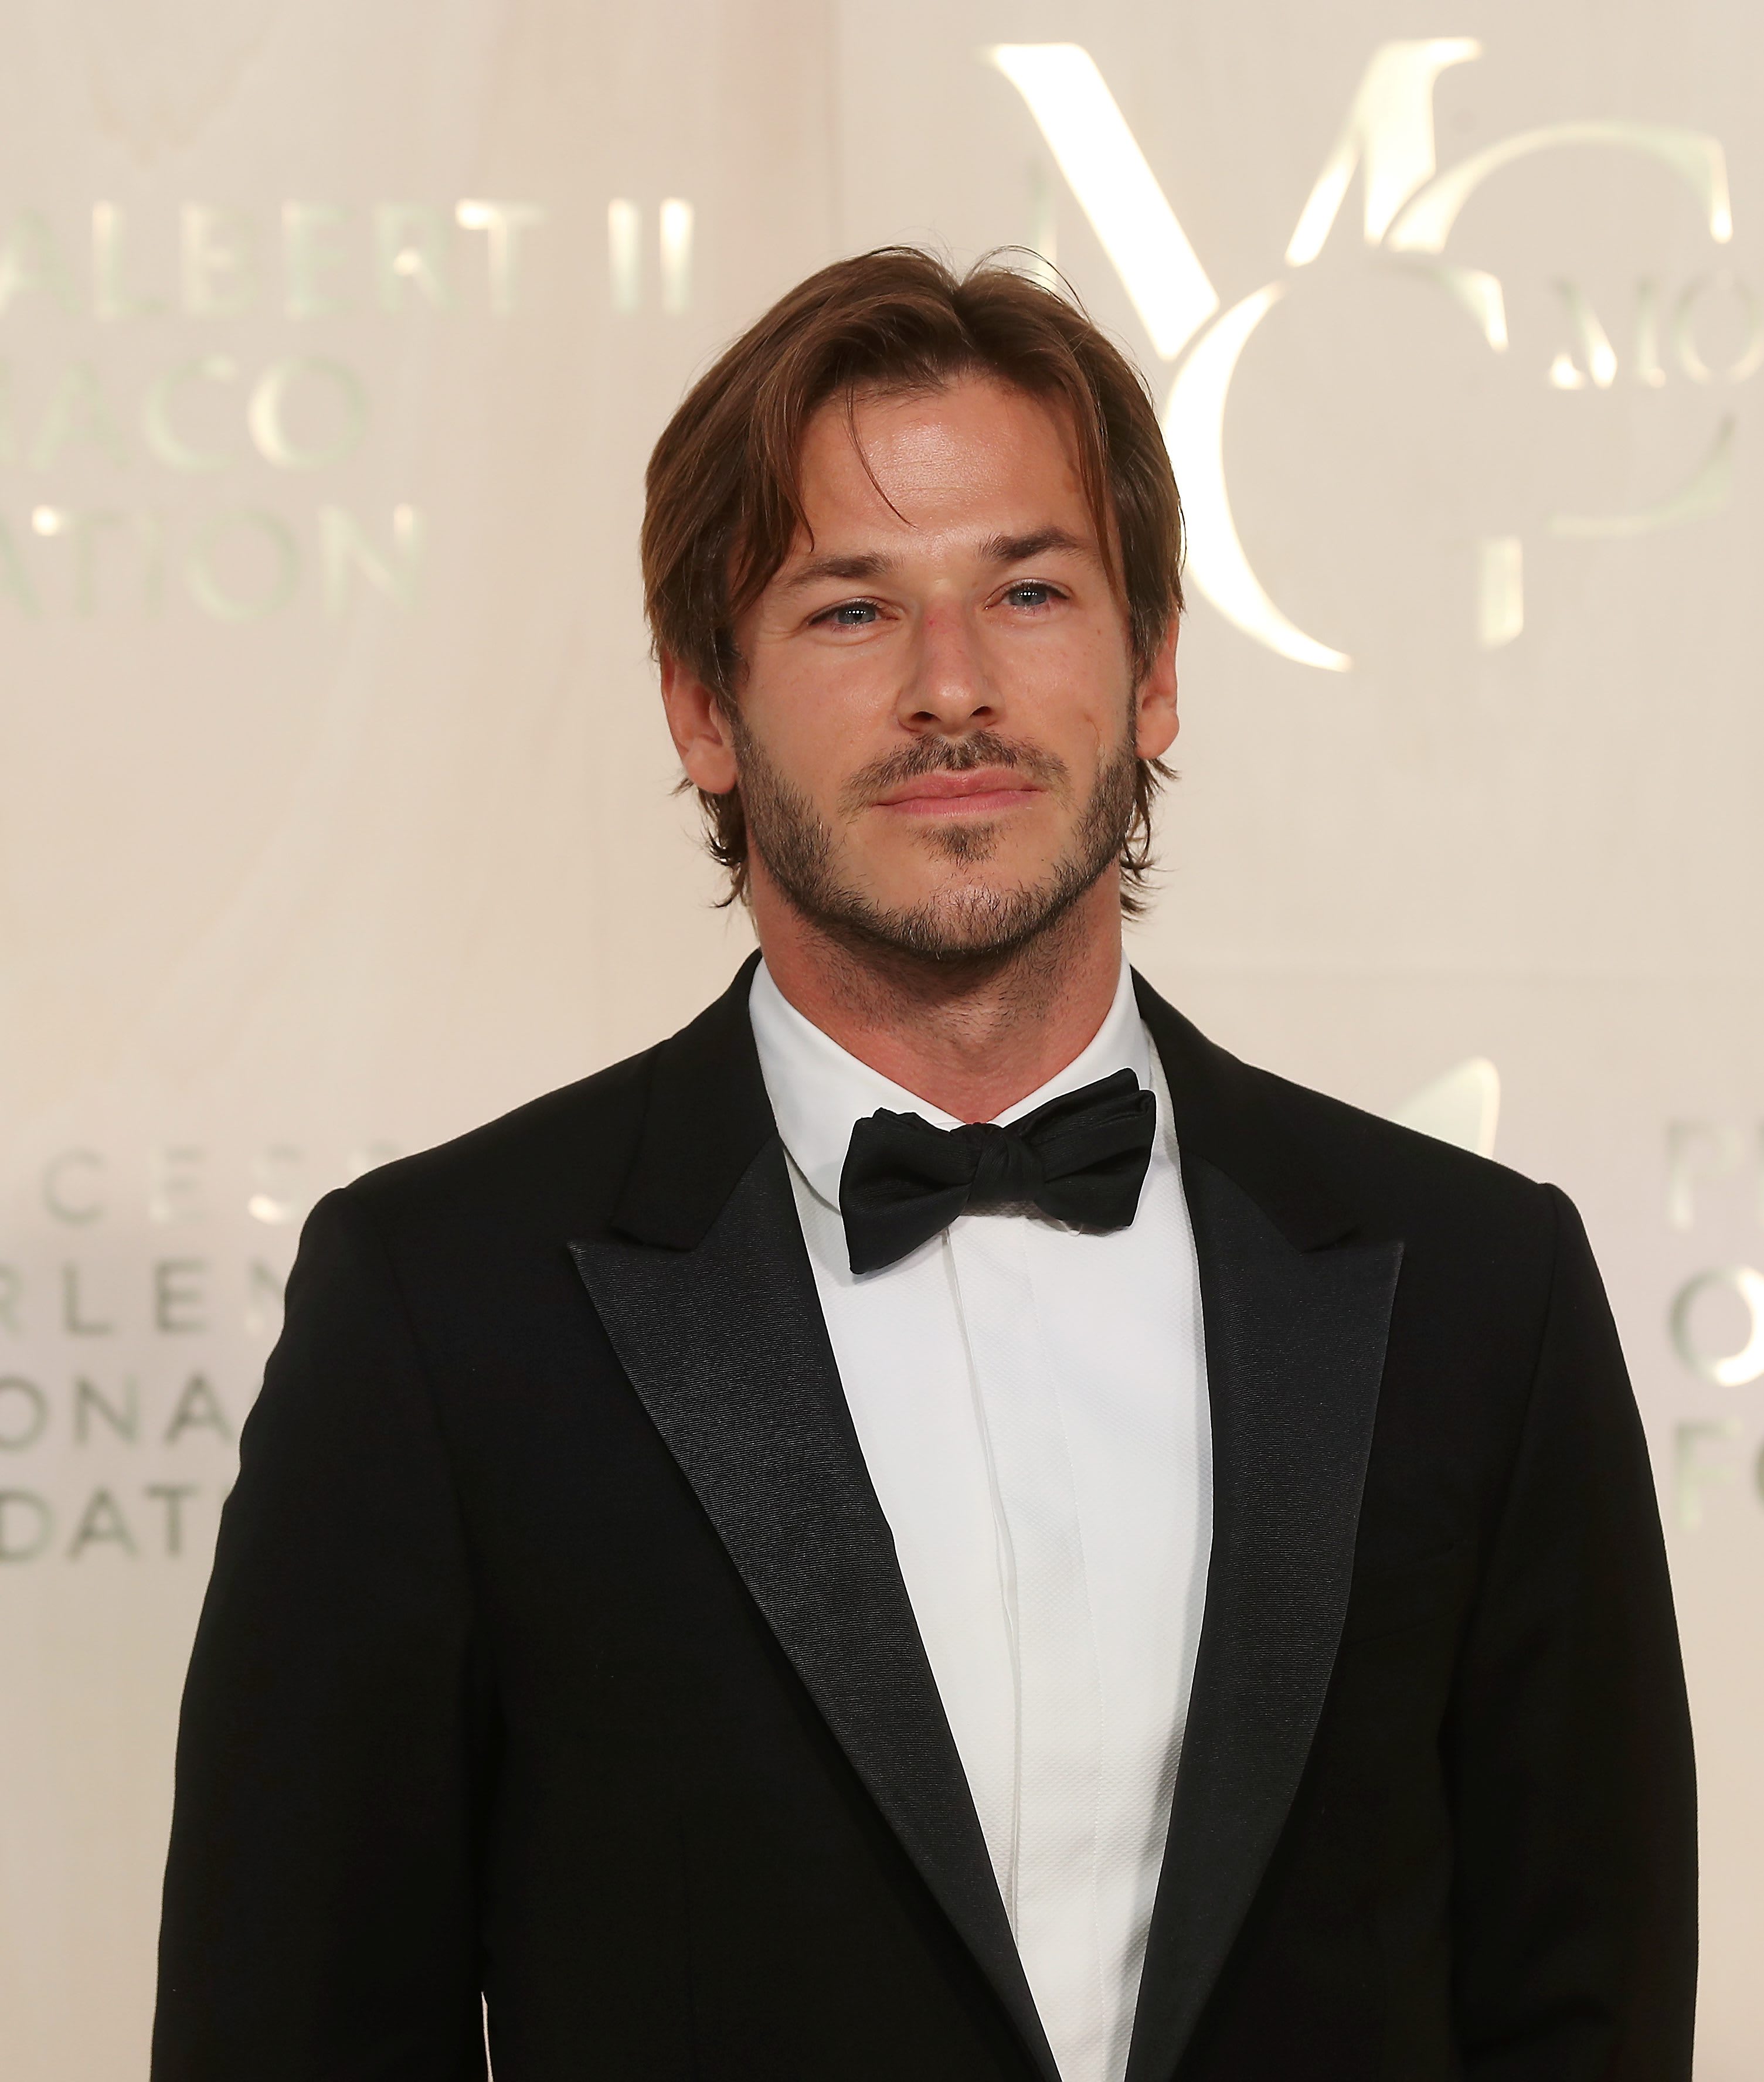 French Actor Gaspard Ulliel, Star of Hannibal Rising And Moon Knight, Dies at 37 After Skiing Accident